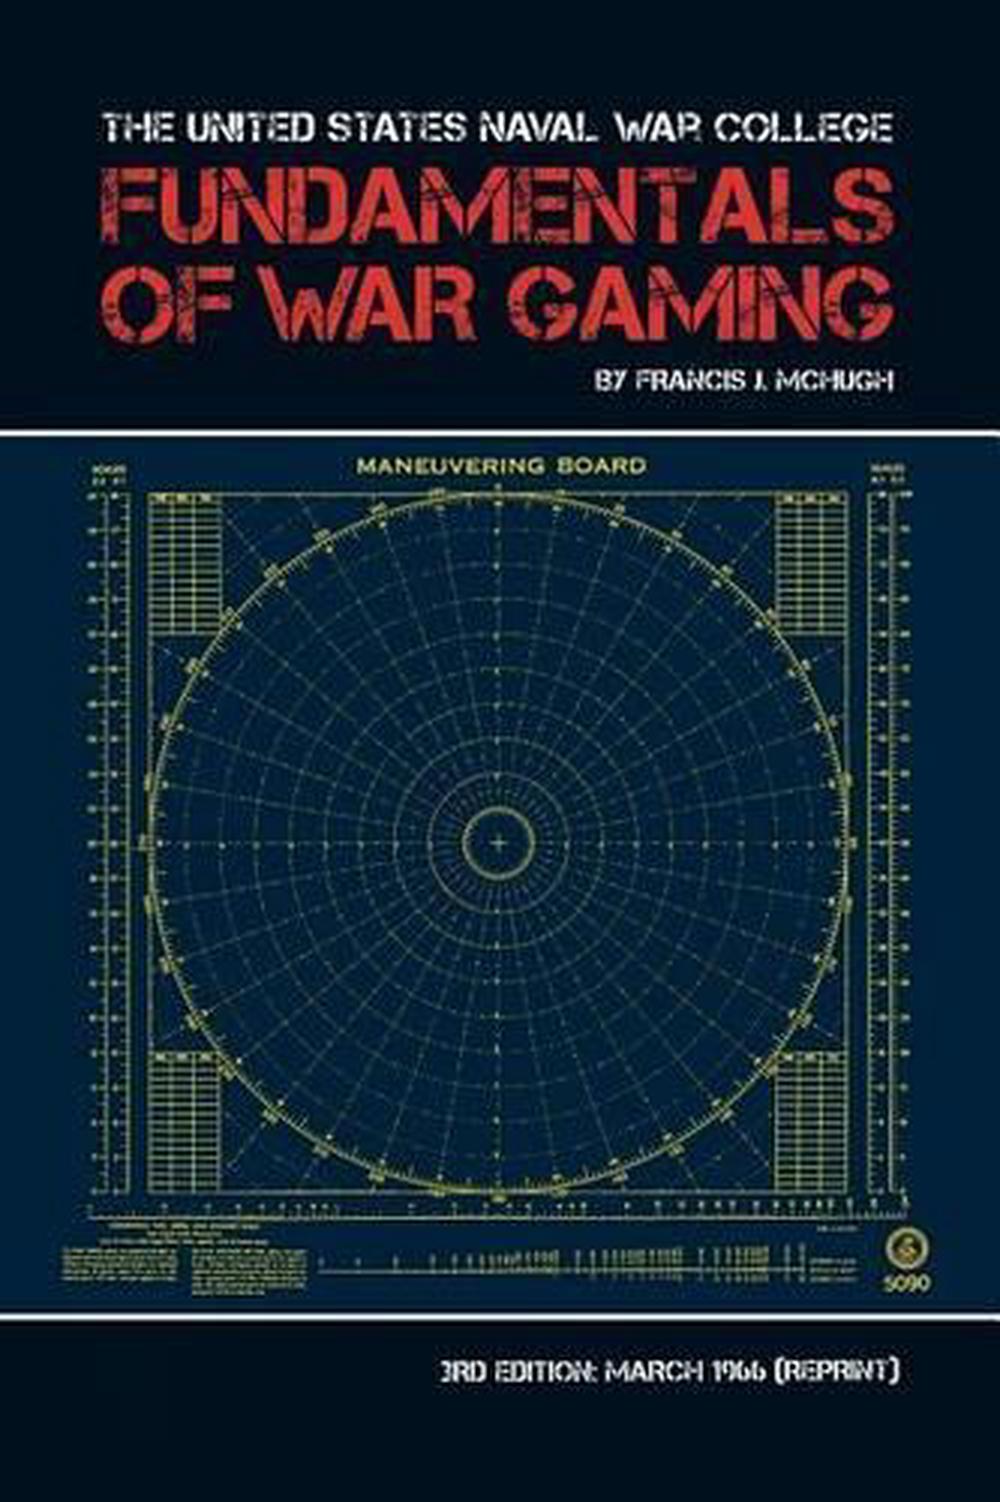 The United States Naval War College Fundamentals of War Gaming by